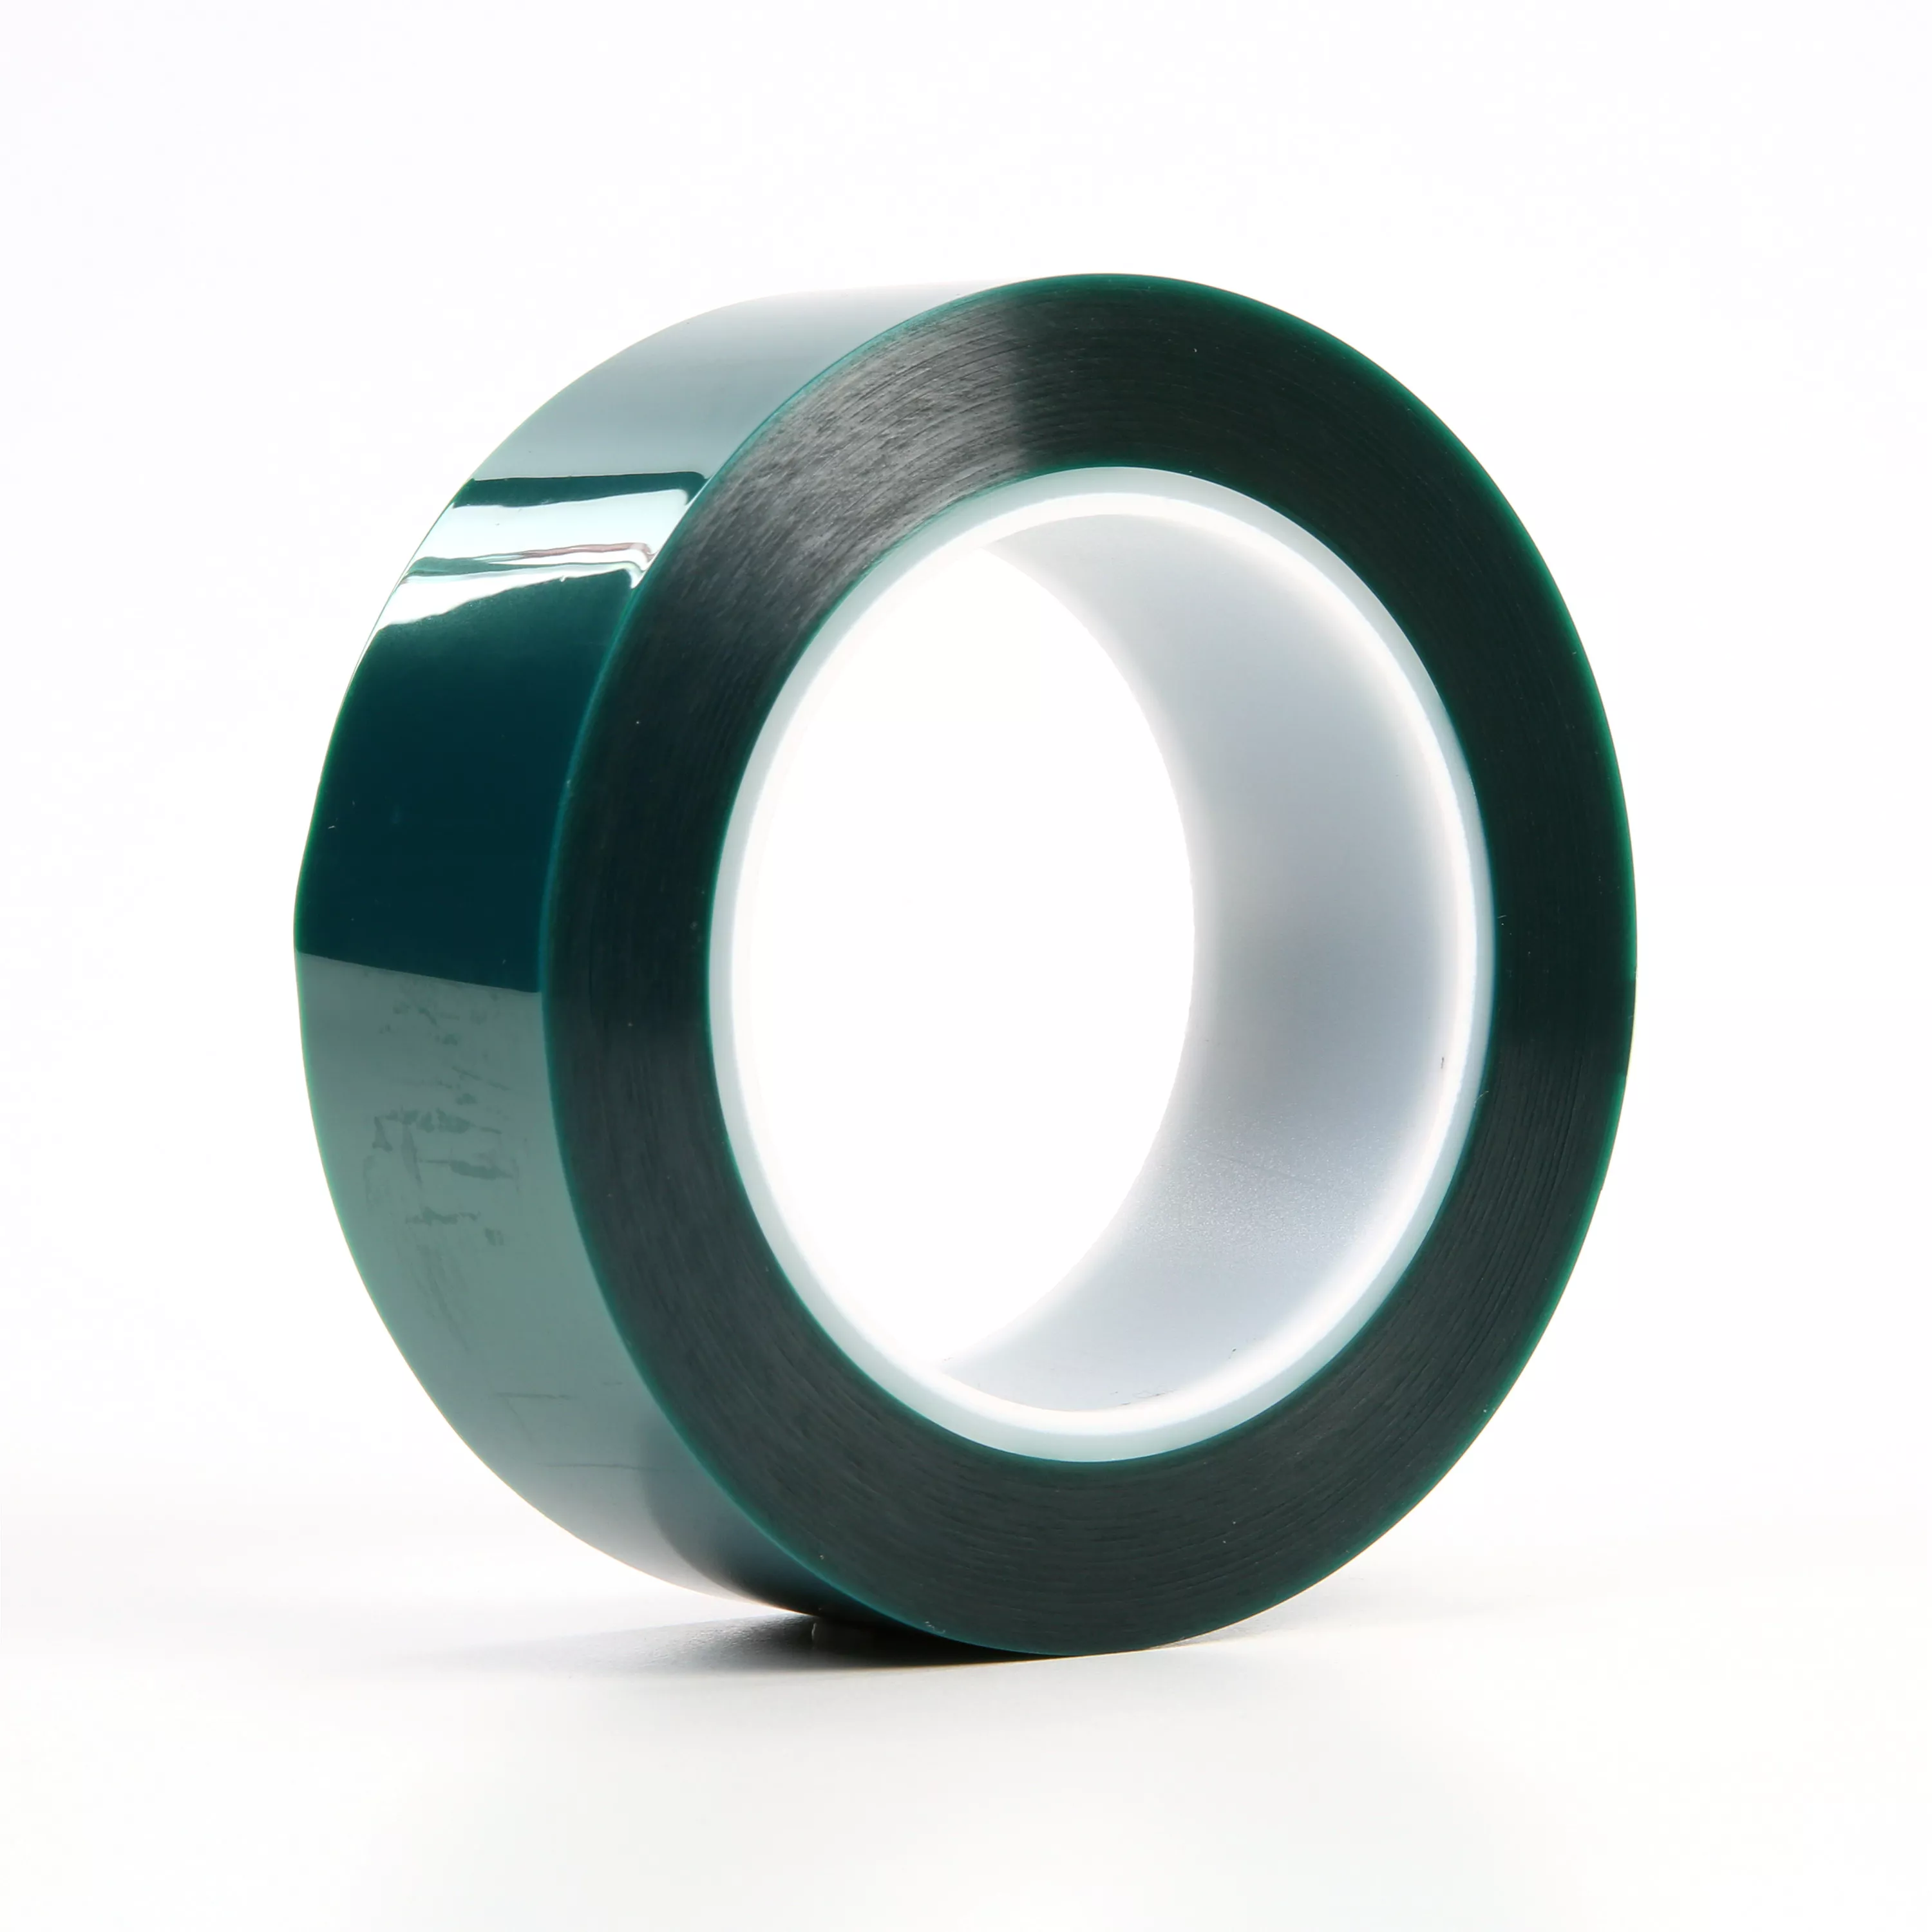 3M™ Polyester Tape 8992, Green, 1 1/2 in x 72 yd, 3.2 mil, 24 Roll/Case